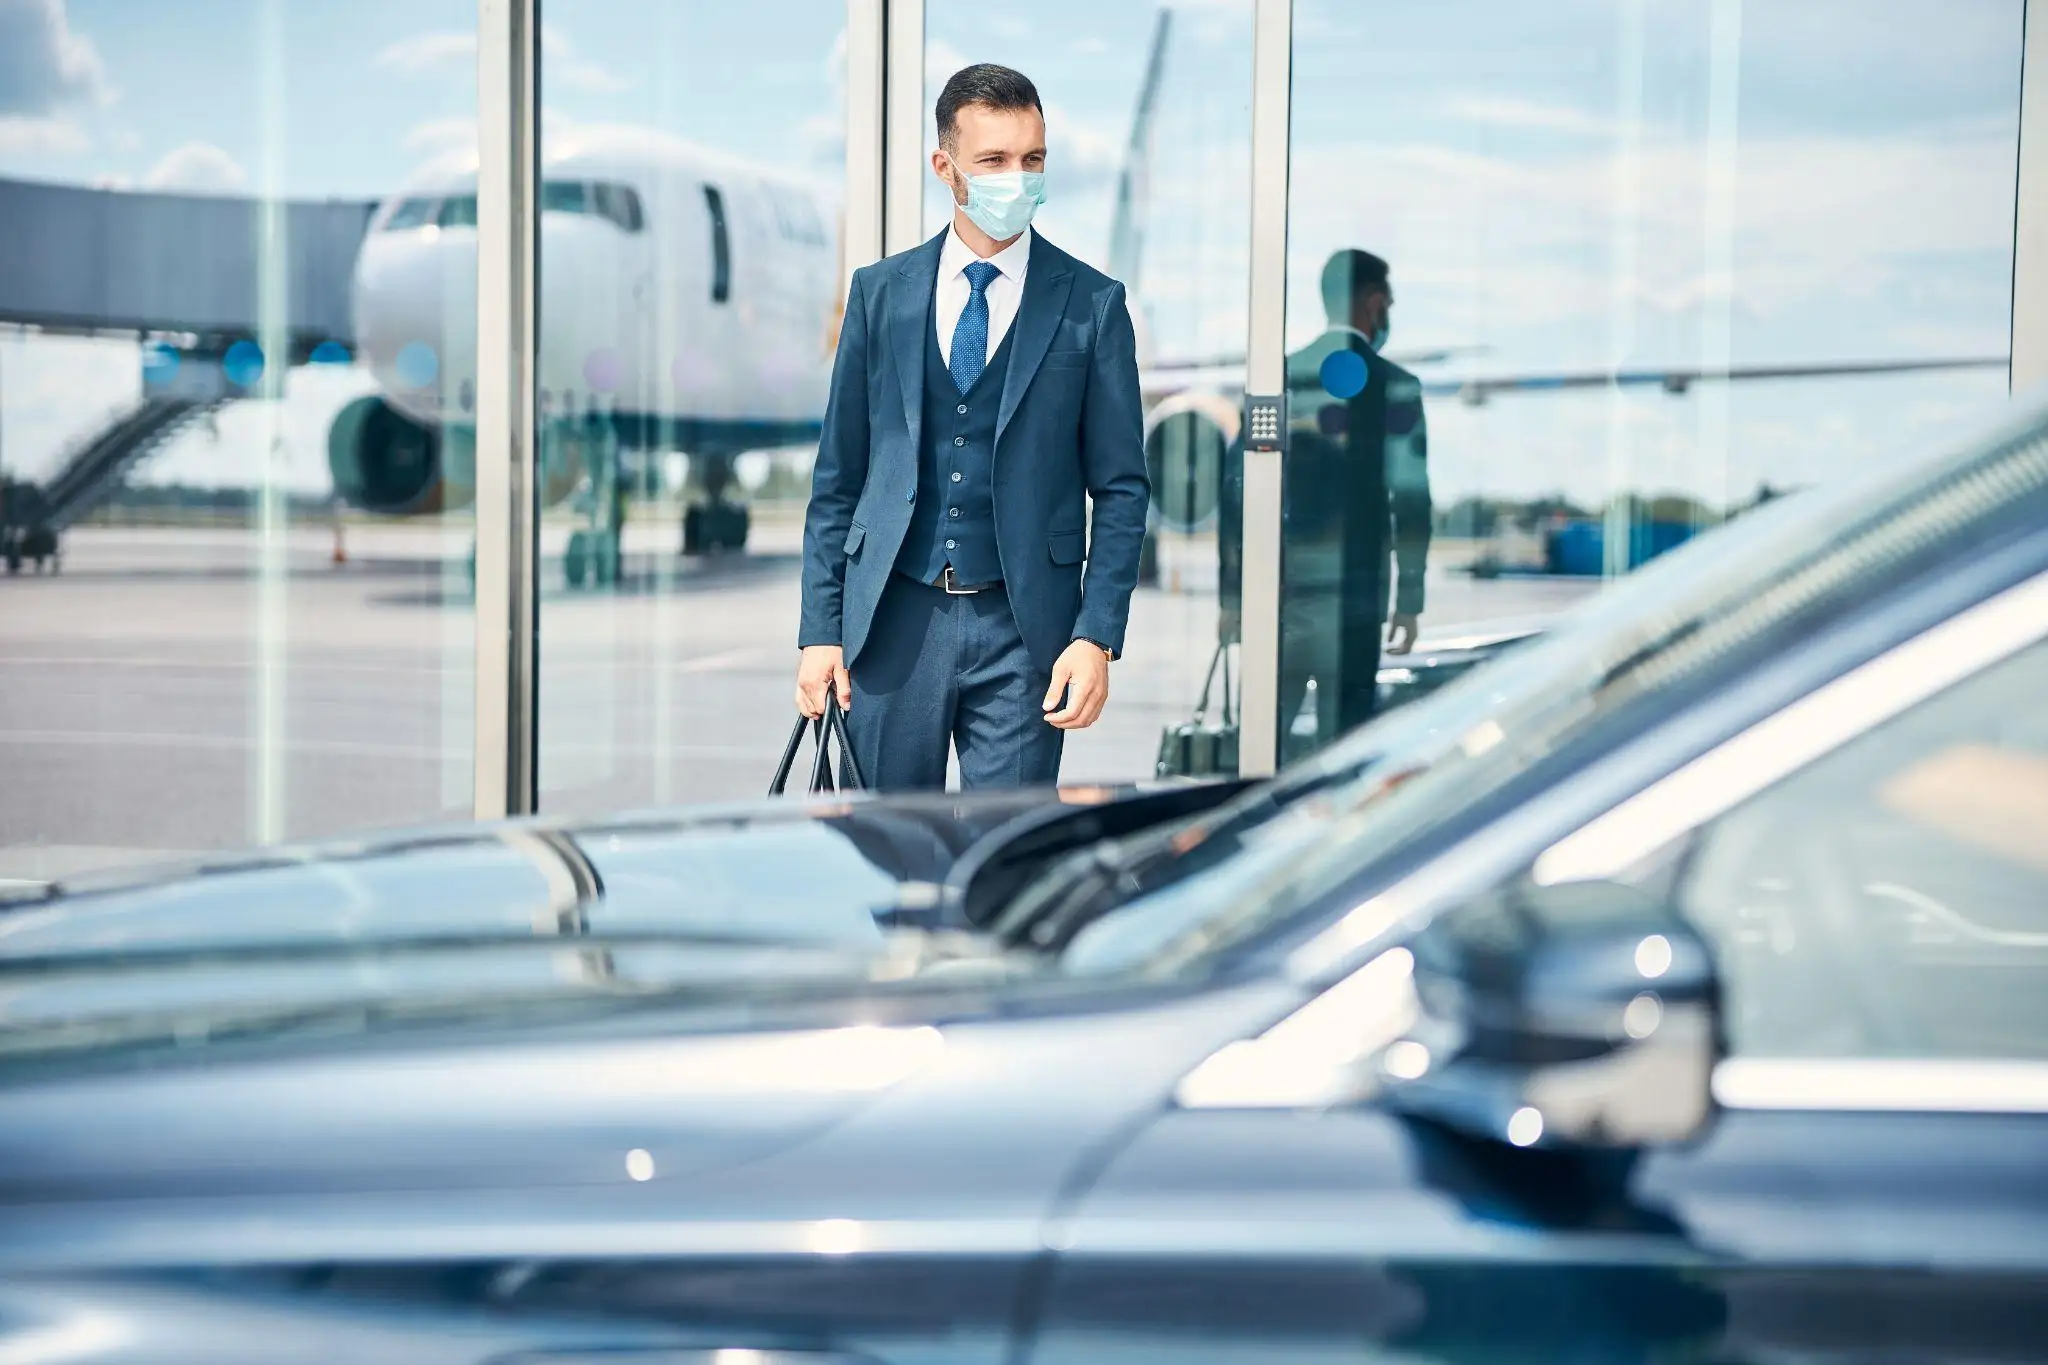 chauffeurs melbourne airport